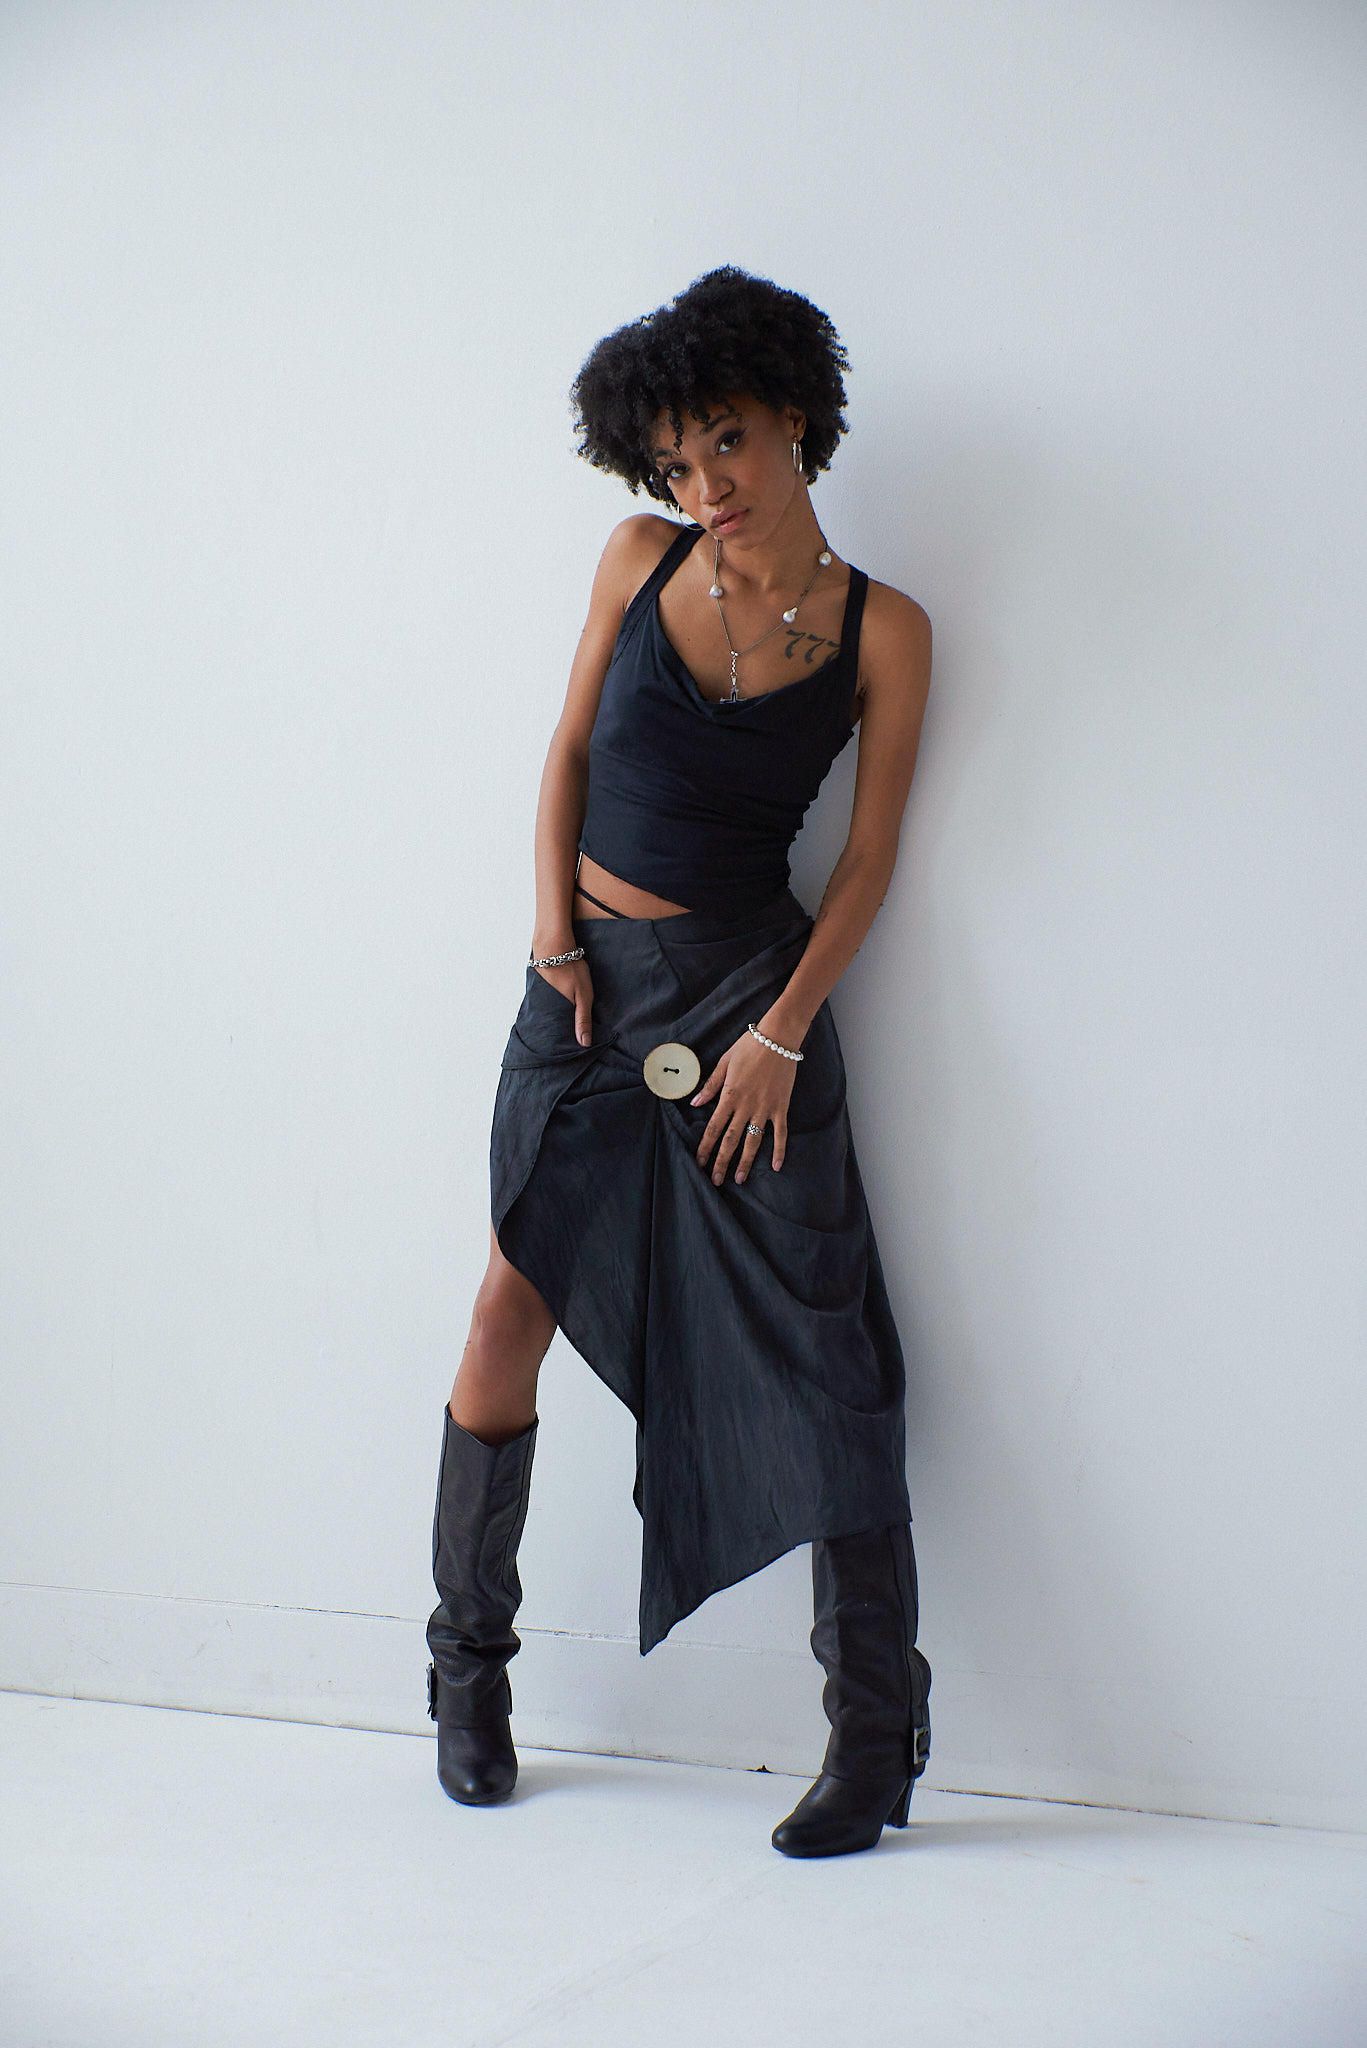 Look One : charcoal tank top and asymmetric skirt. Garments made from recycled materials. Photos by Shanthosh Ravikumar.